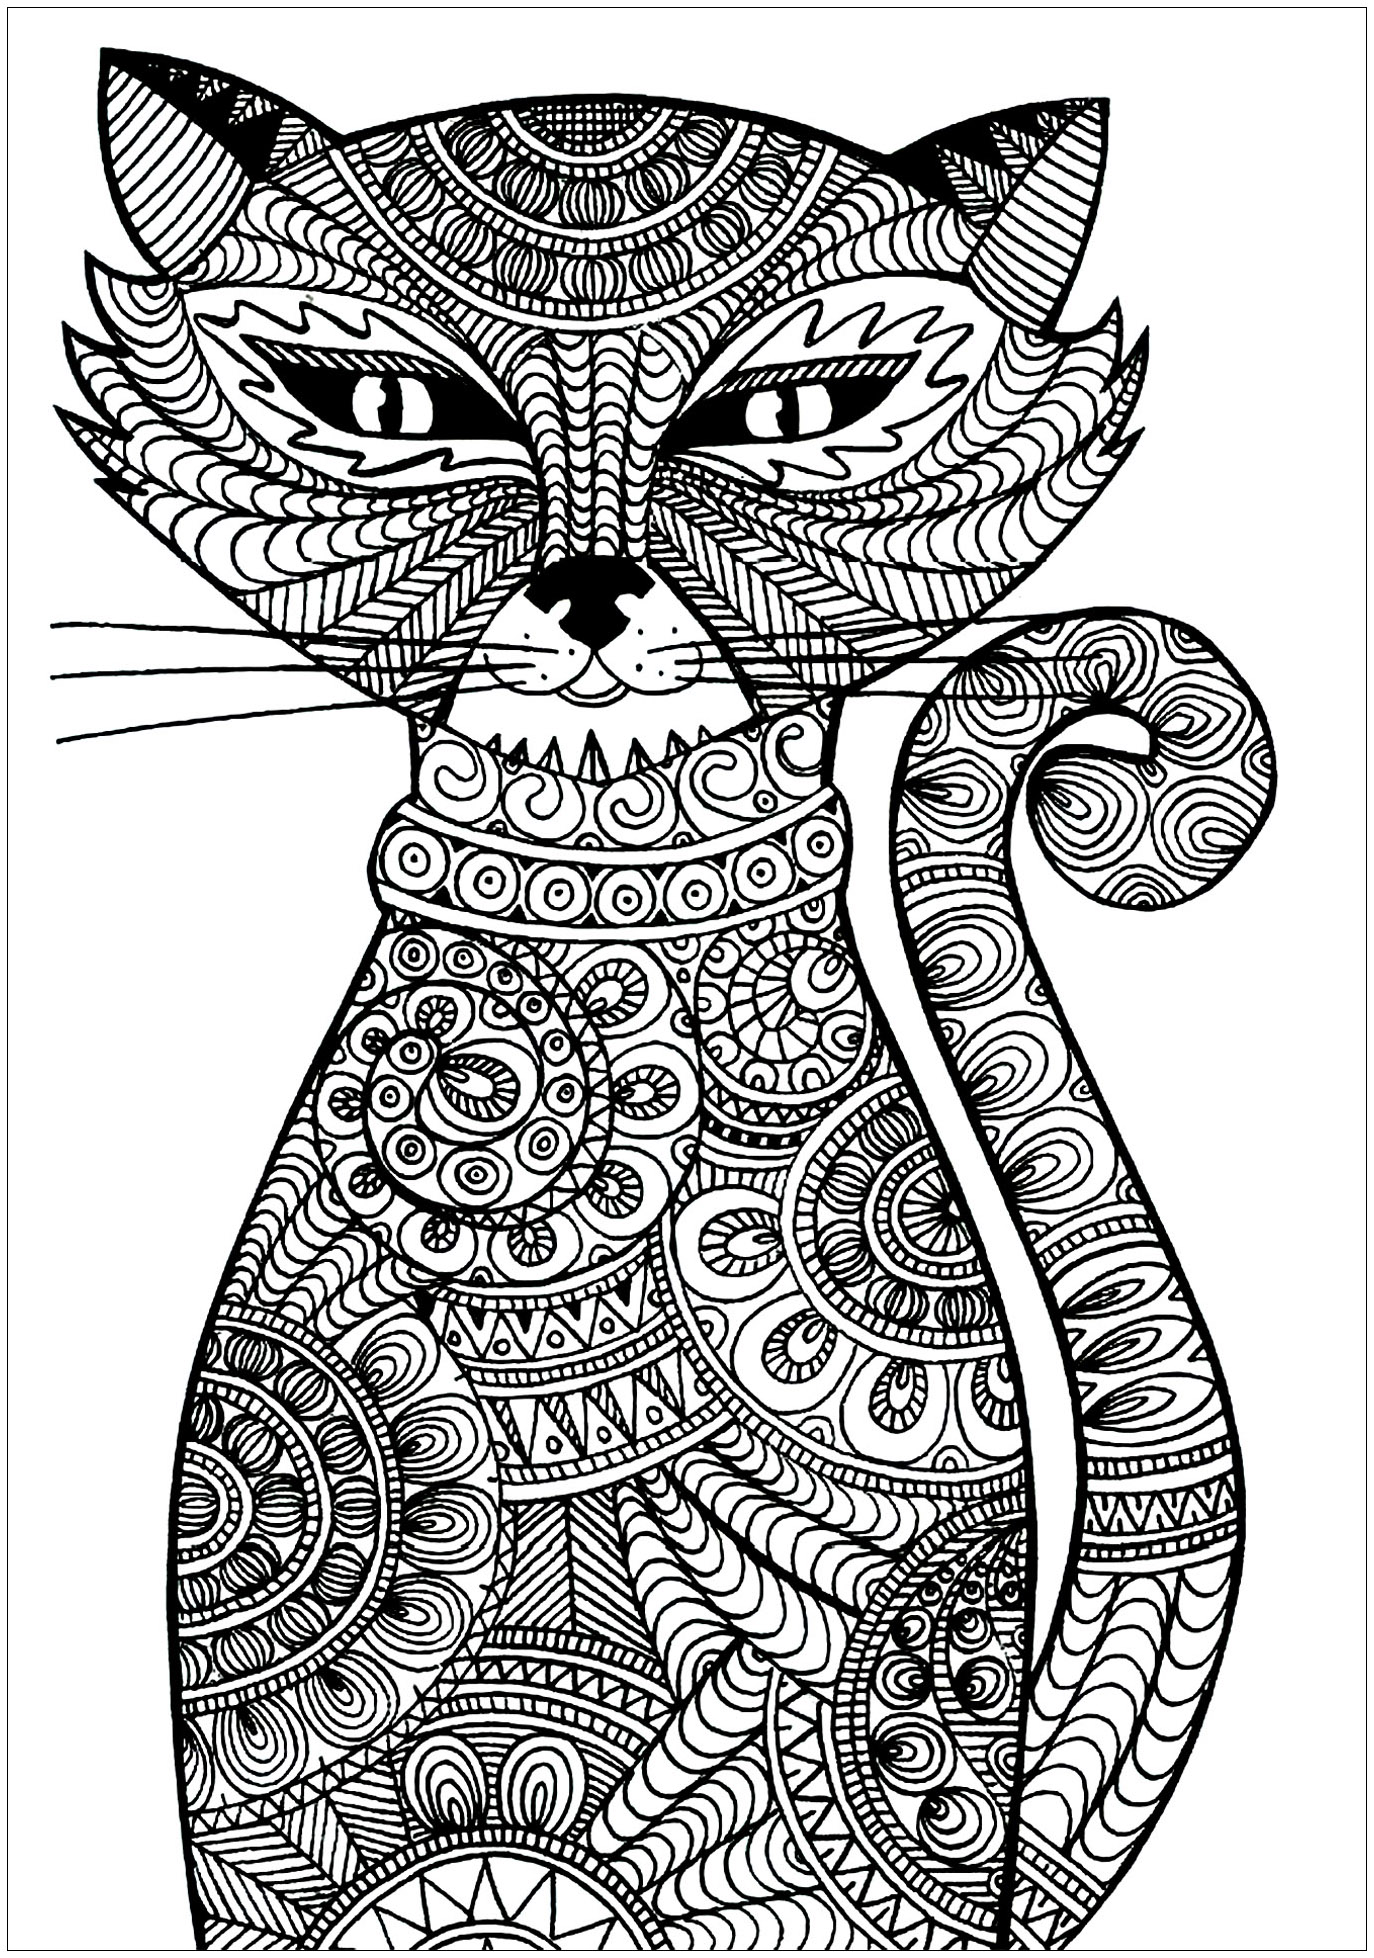 Pet - Coloring Pages for Adults